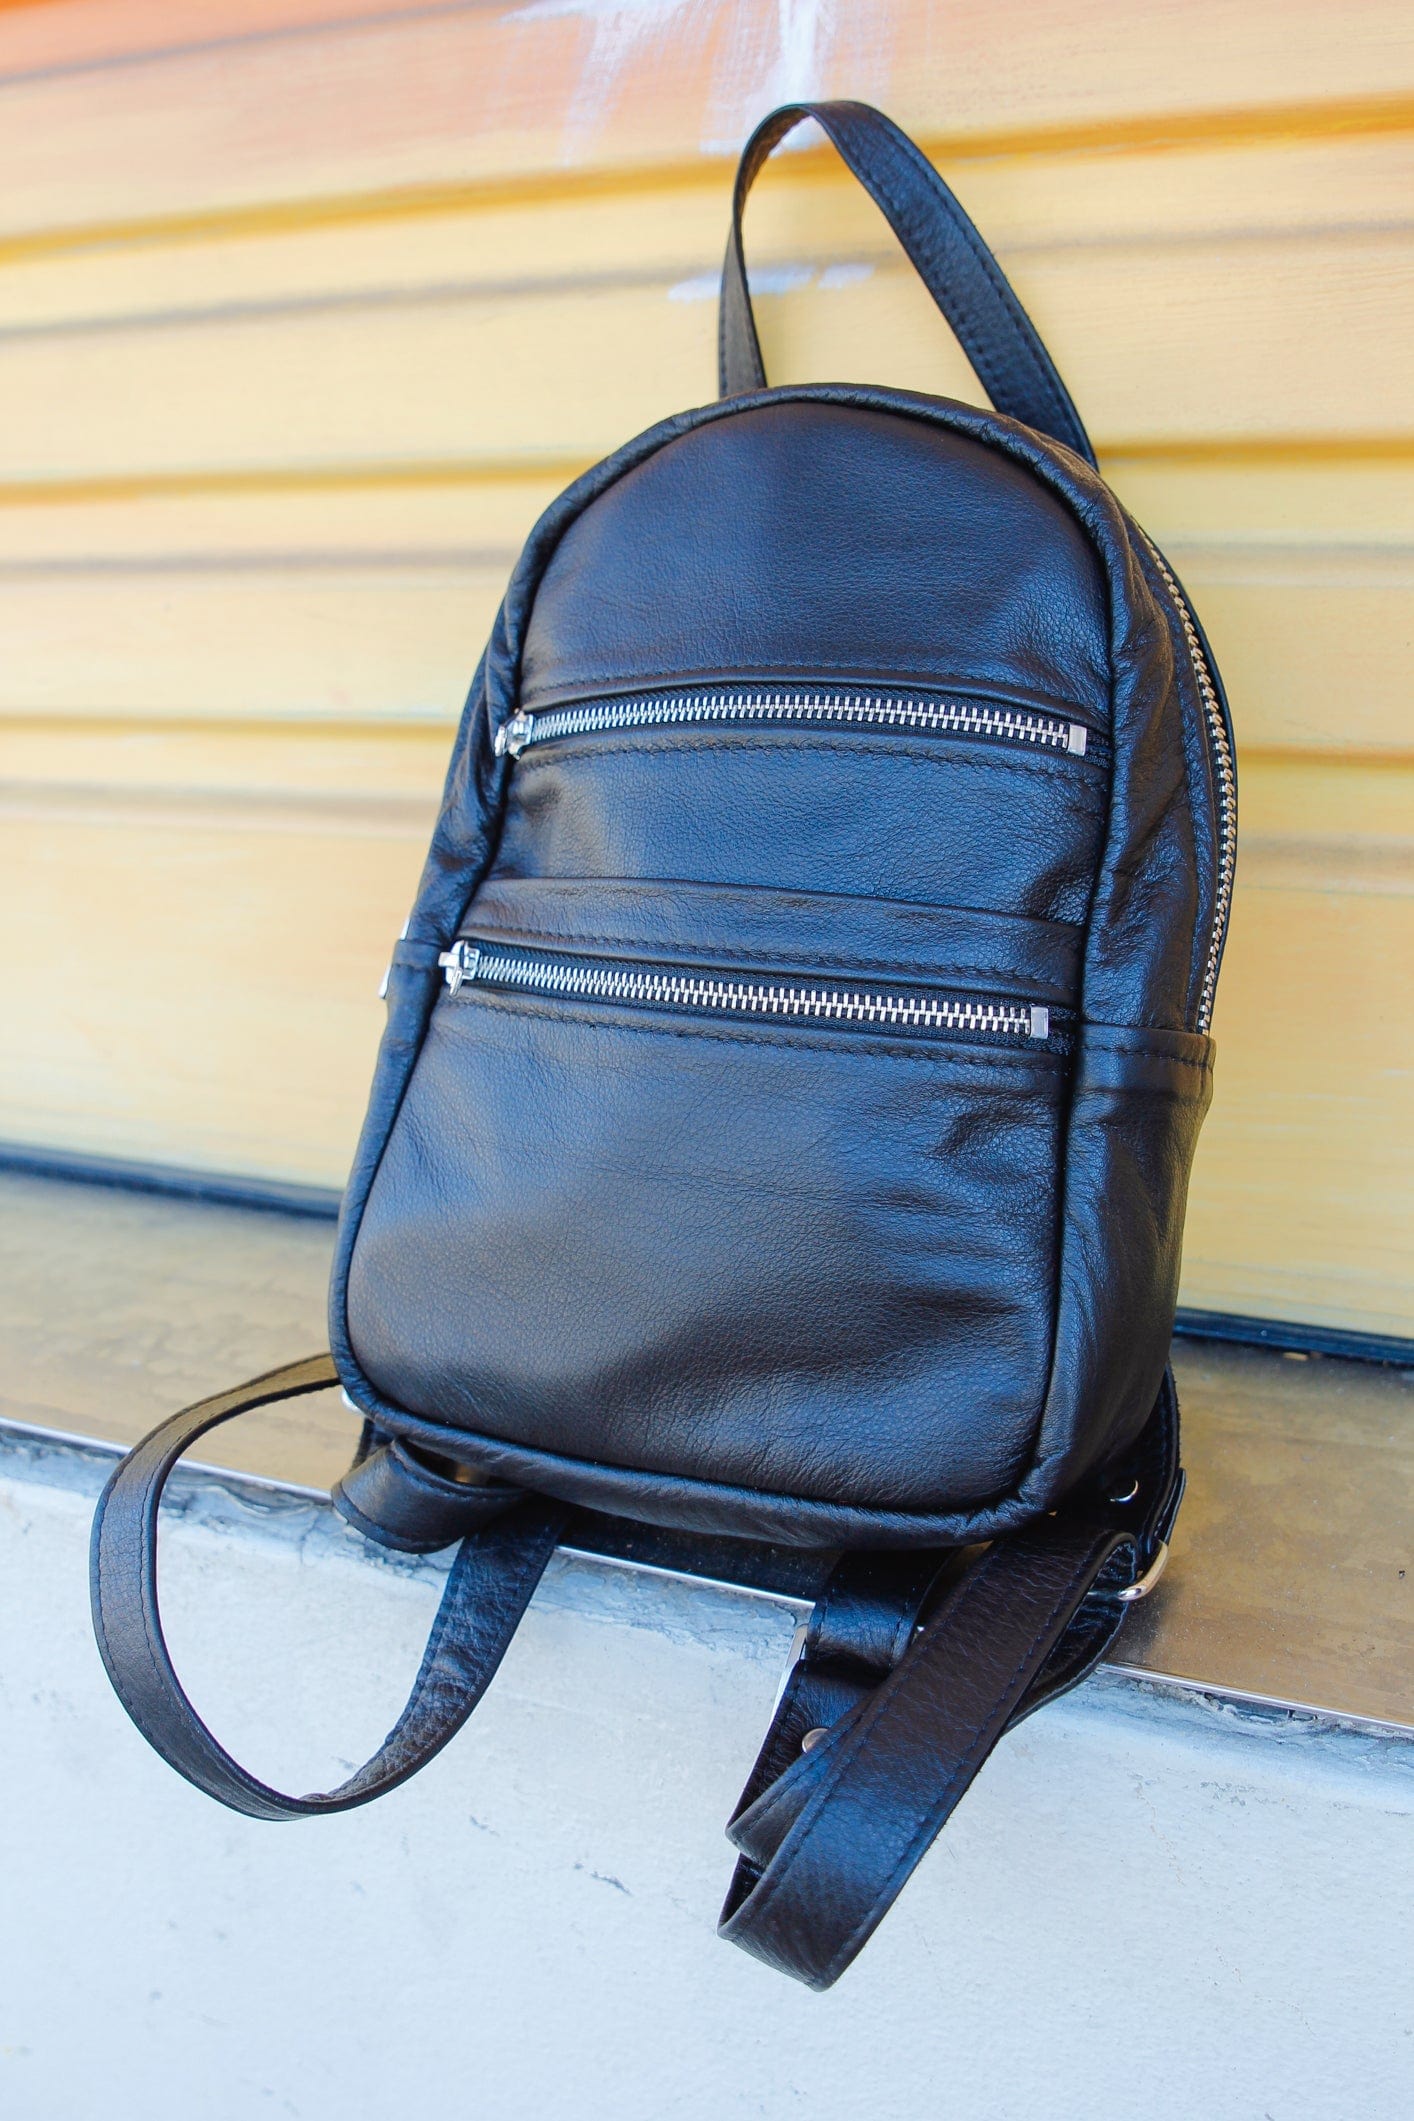 The Real McCaul Leathergoods Back Packs The Annie Backpack - Small - Cowhide Australian Made Australian Owned Leather Backpacks Made in Australia